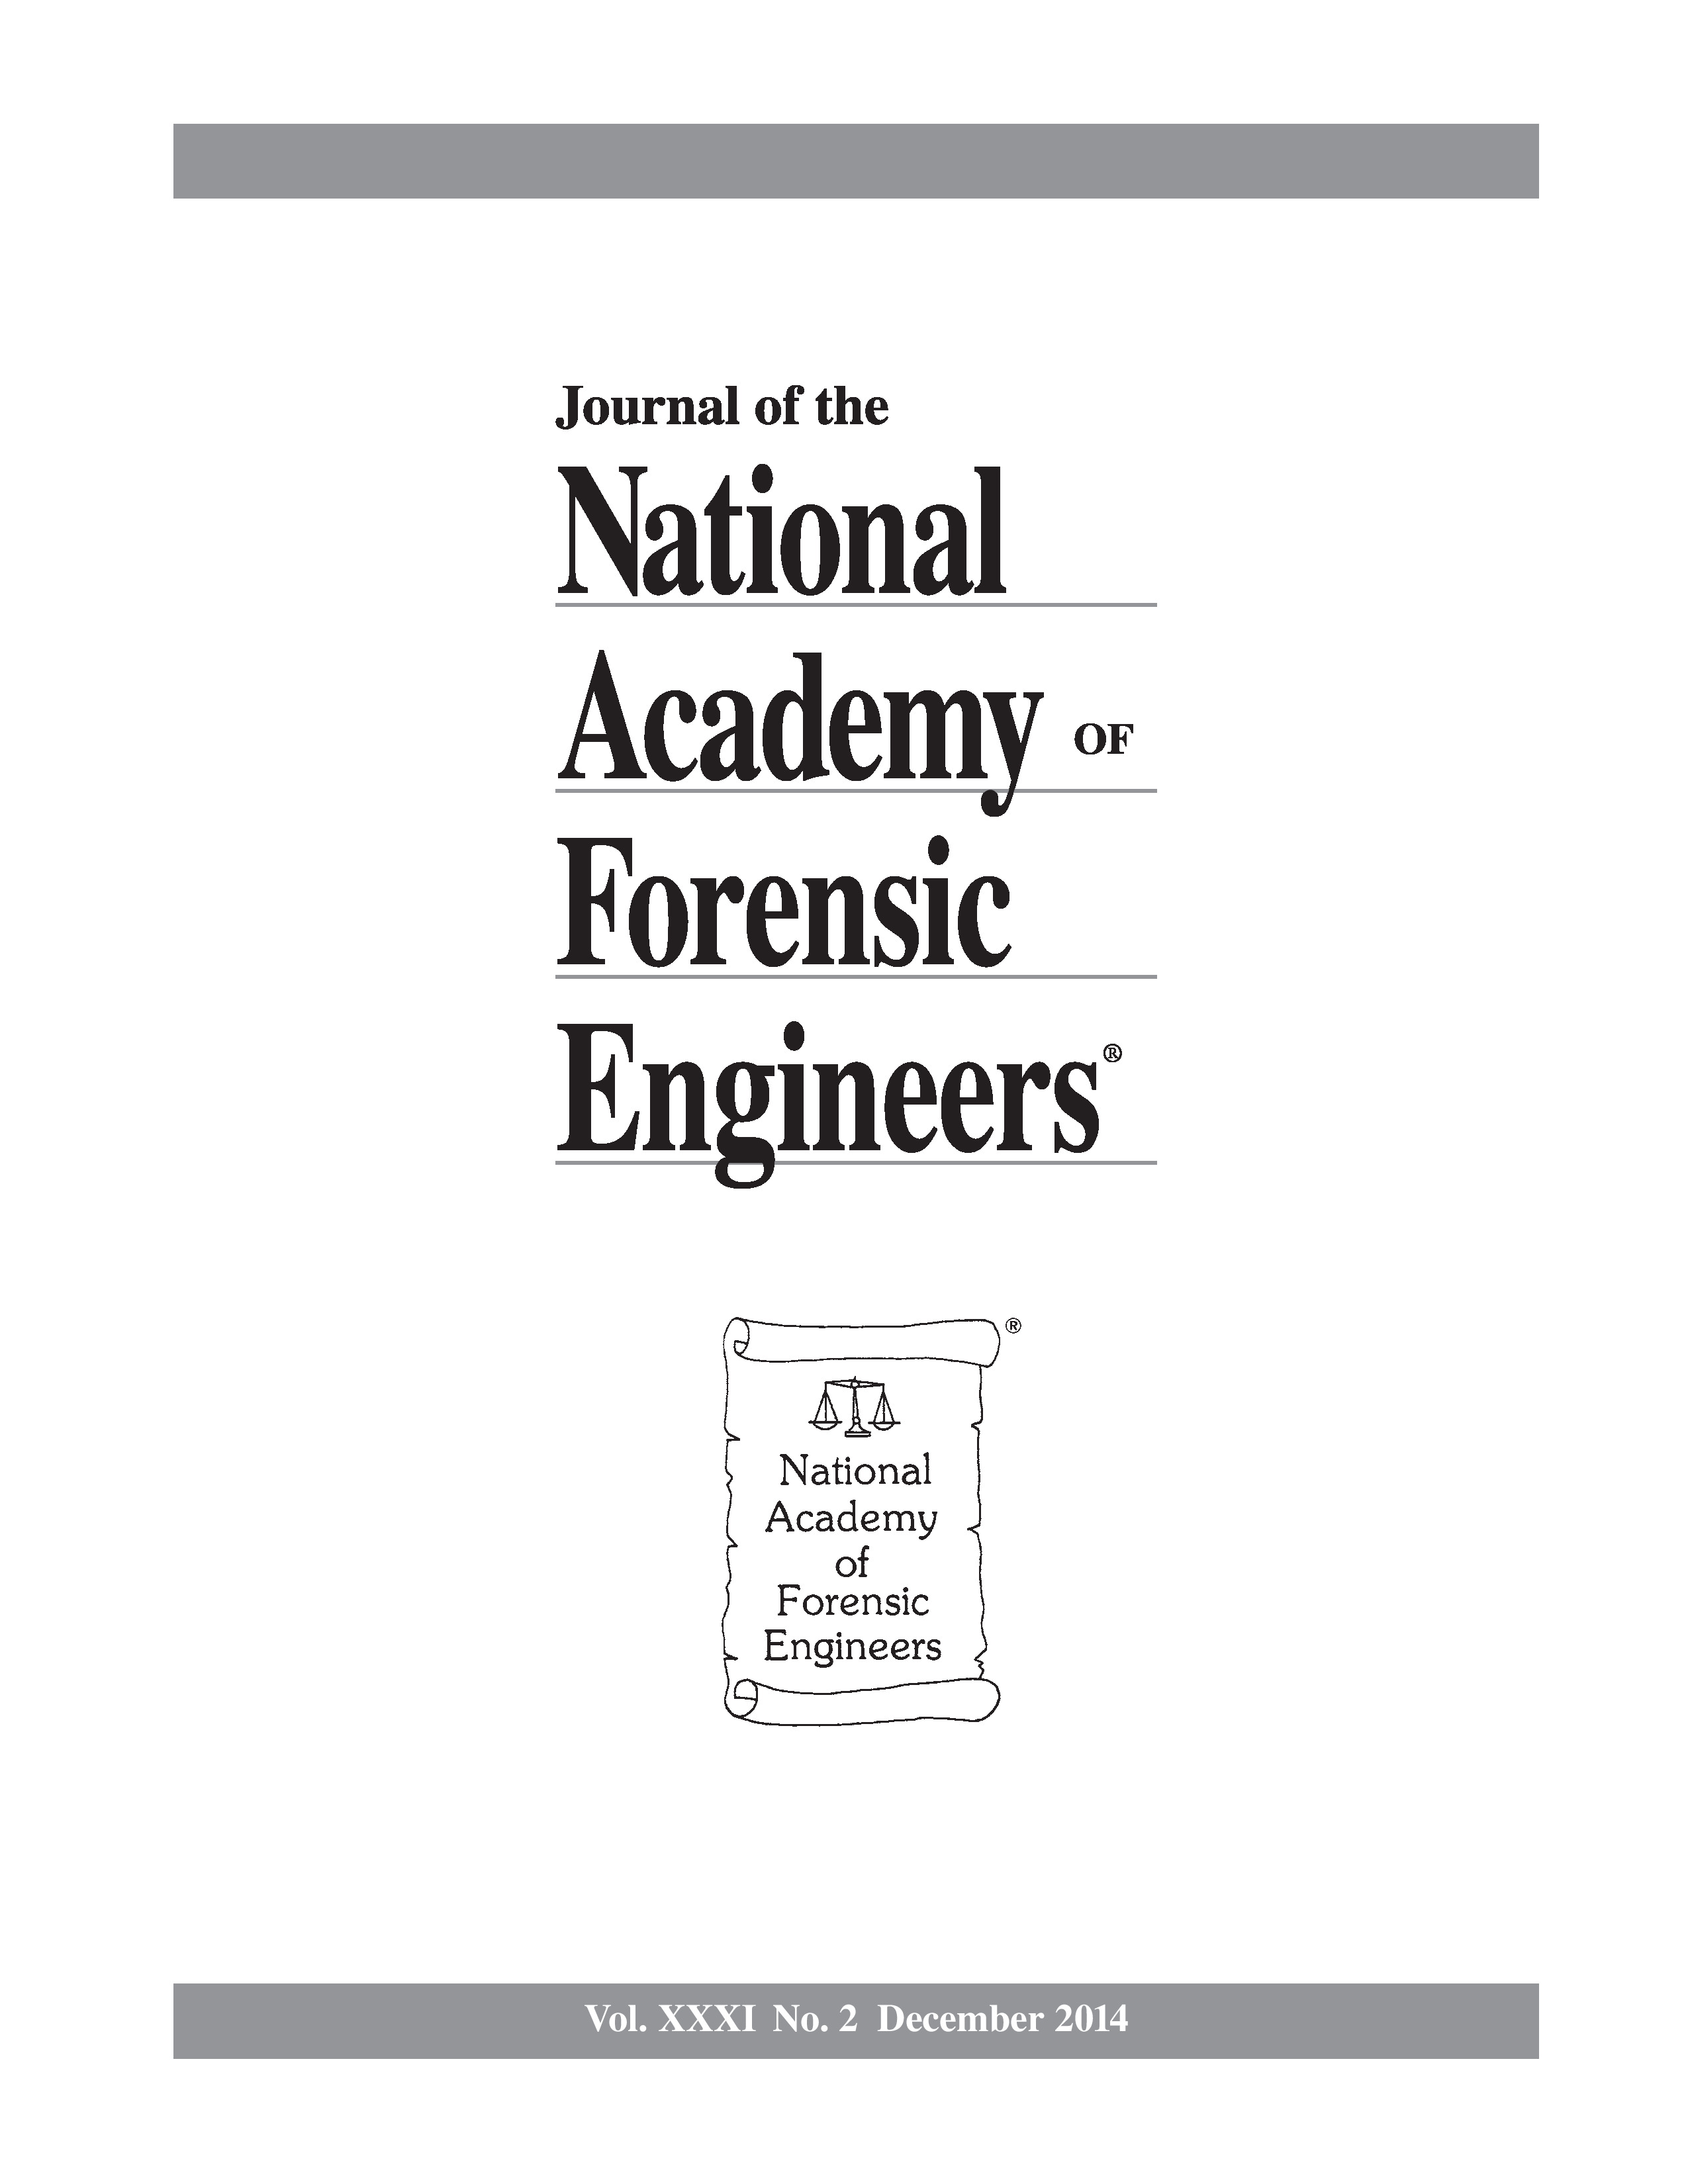 Cover of the Journal of the National Academy of Forensic Engineers